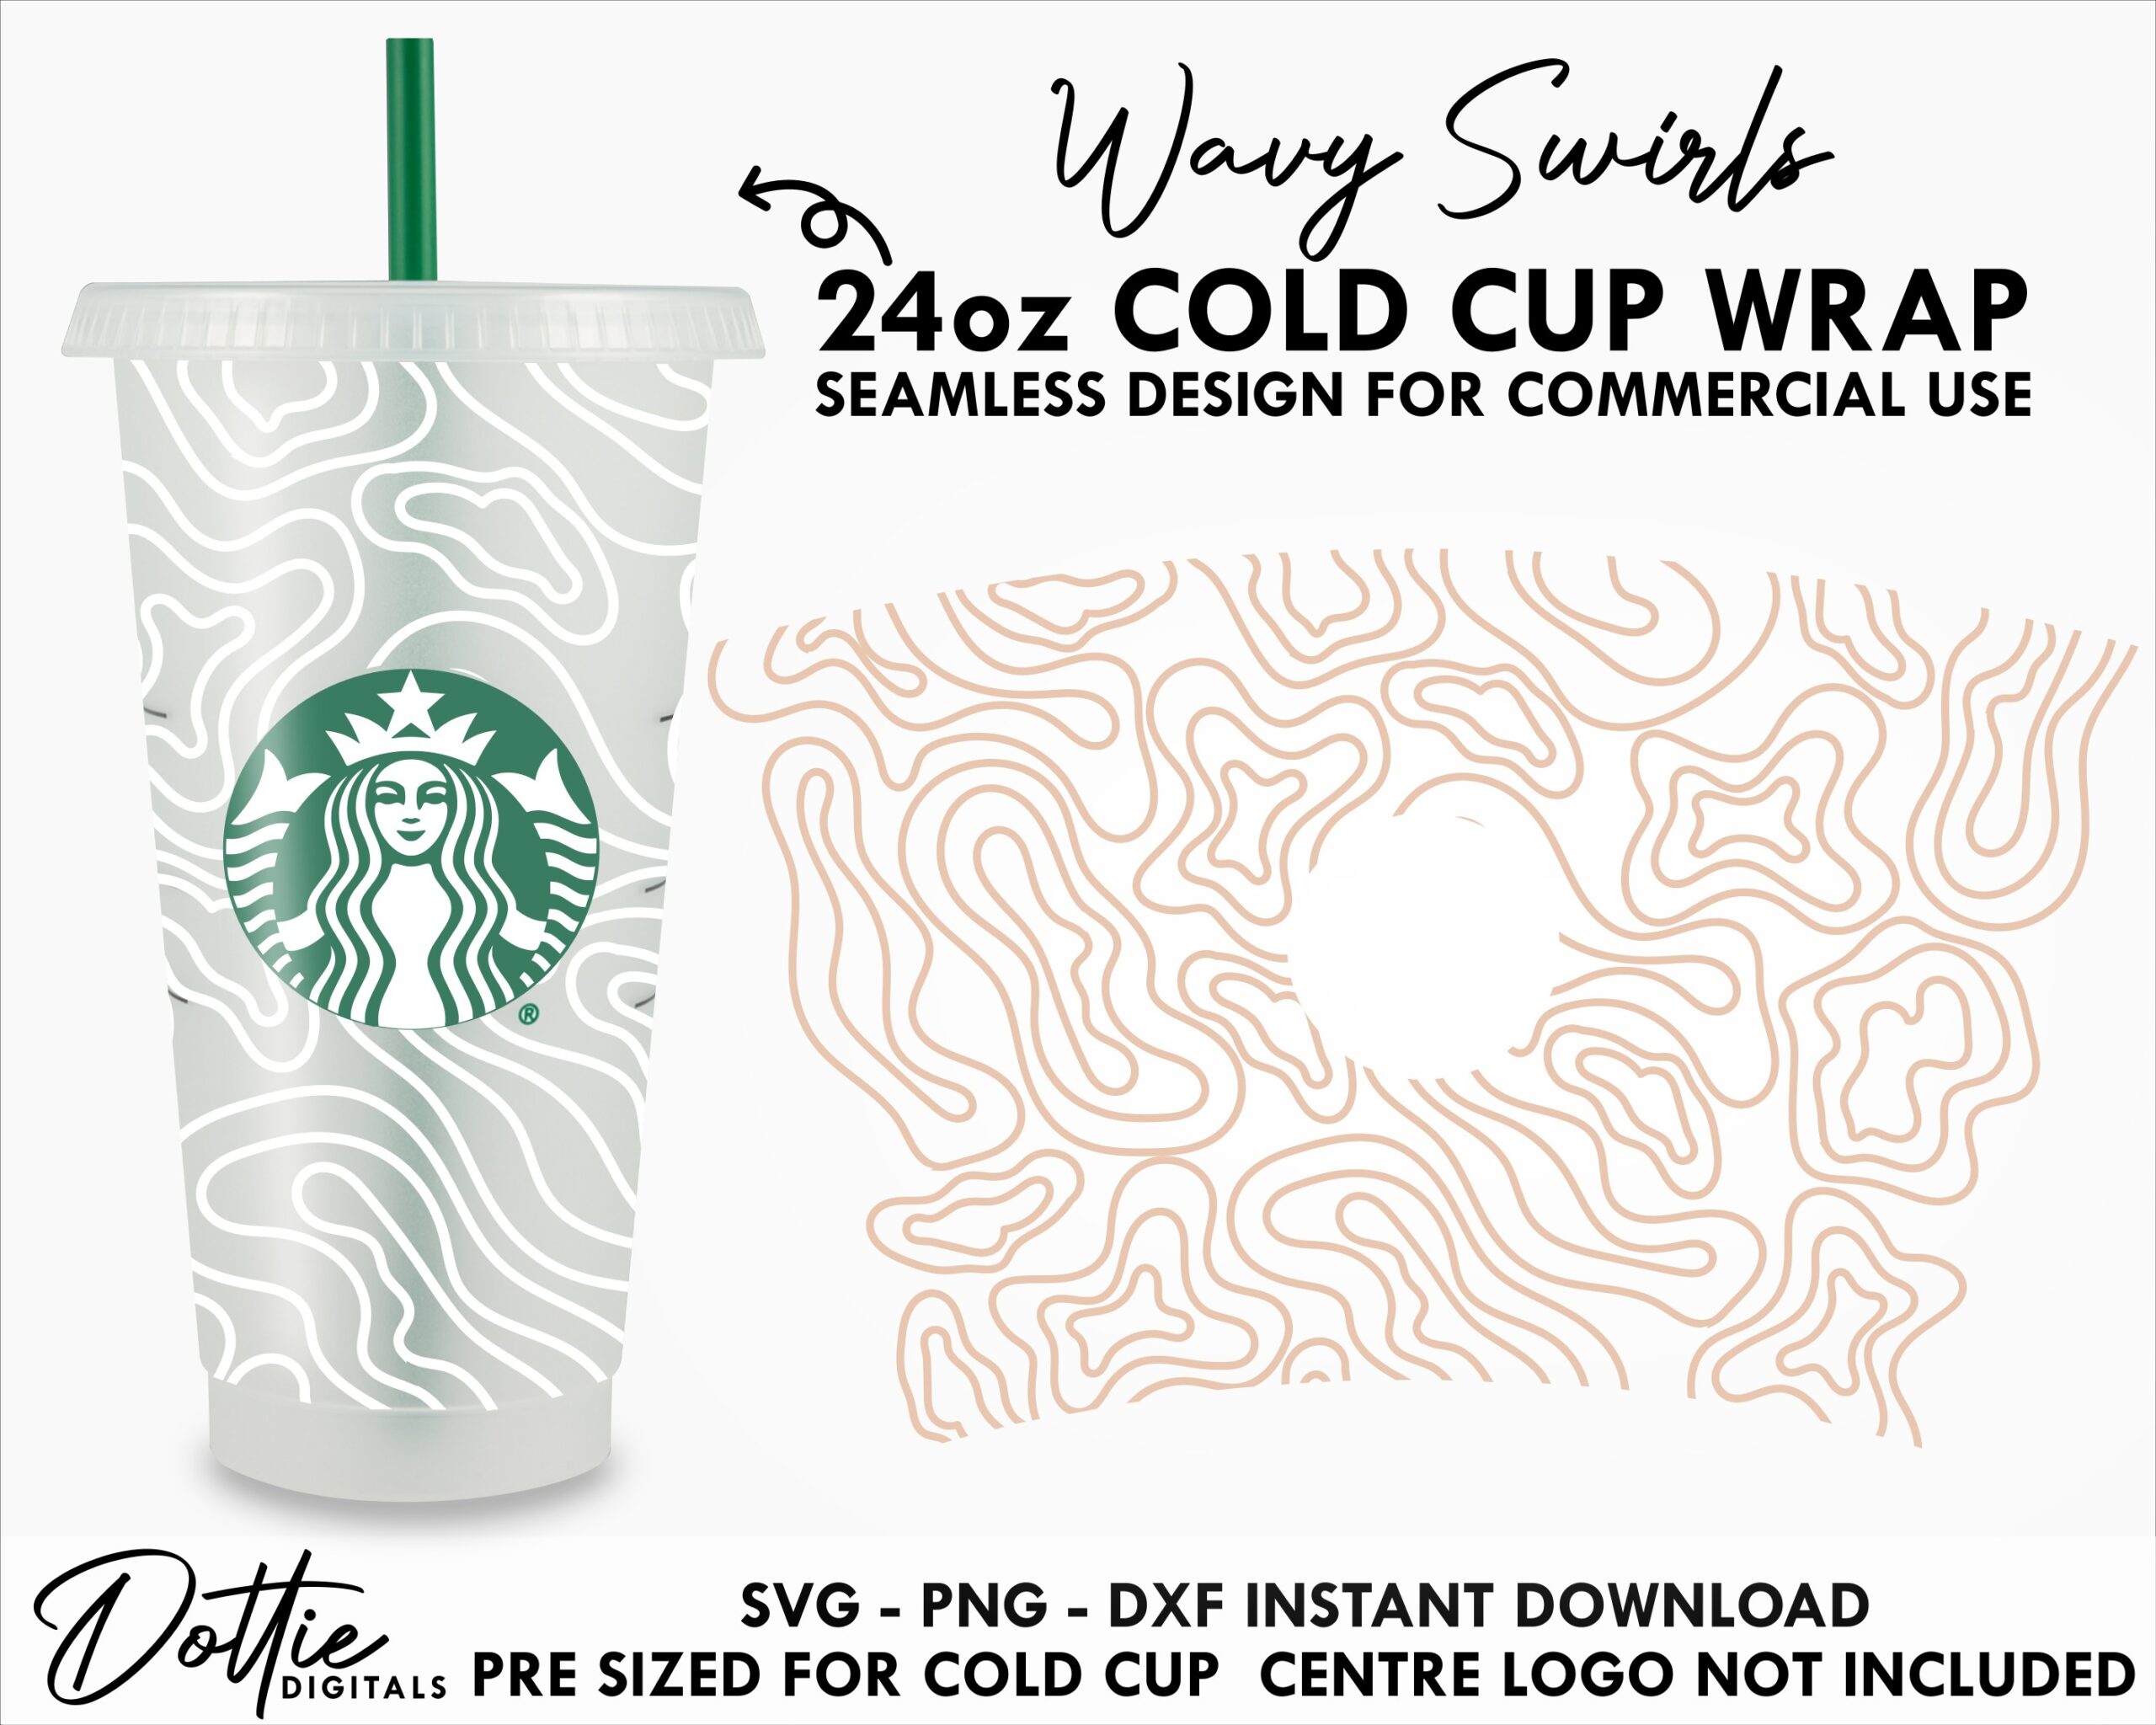 Terrazzo Starbucks Cold Cup SVG PNG Dxf Terrazzo Pattern Tiles 24oz Venti  Cup Instant Digital Download Coffee Tumbler